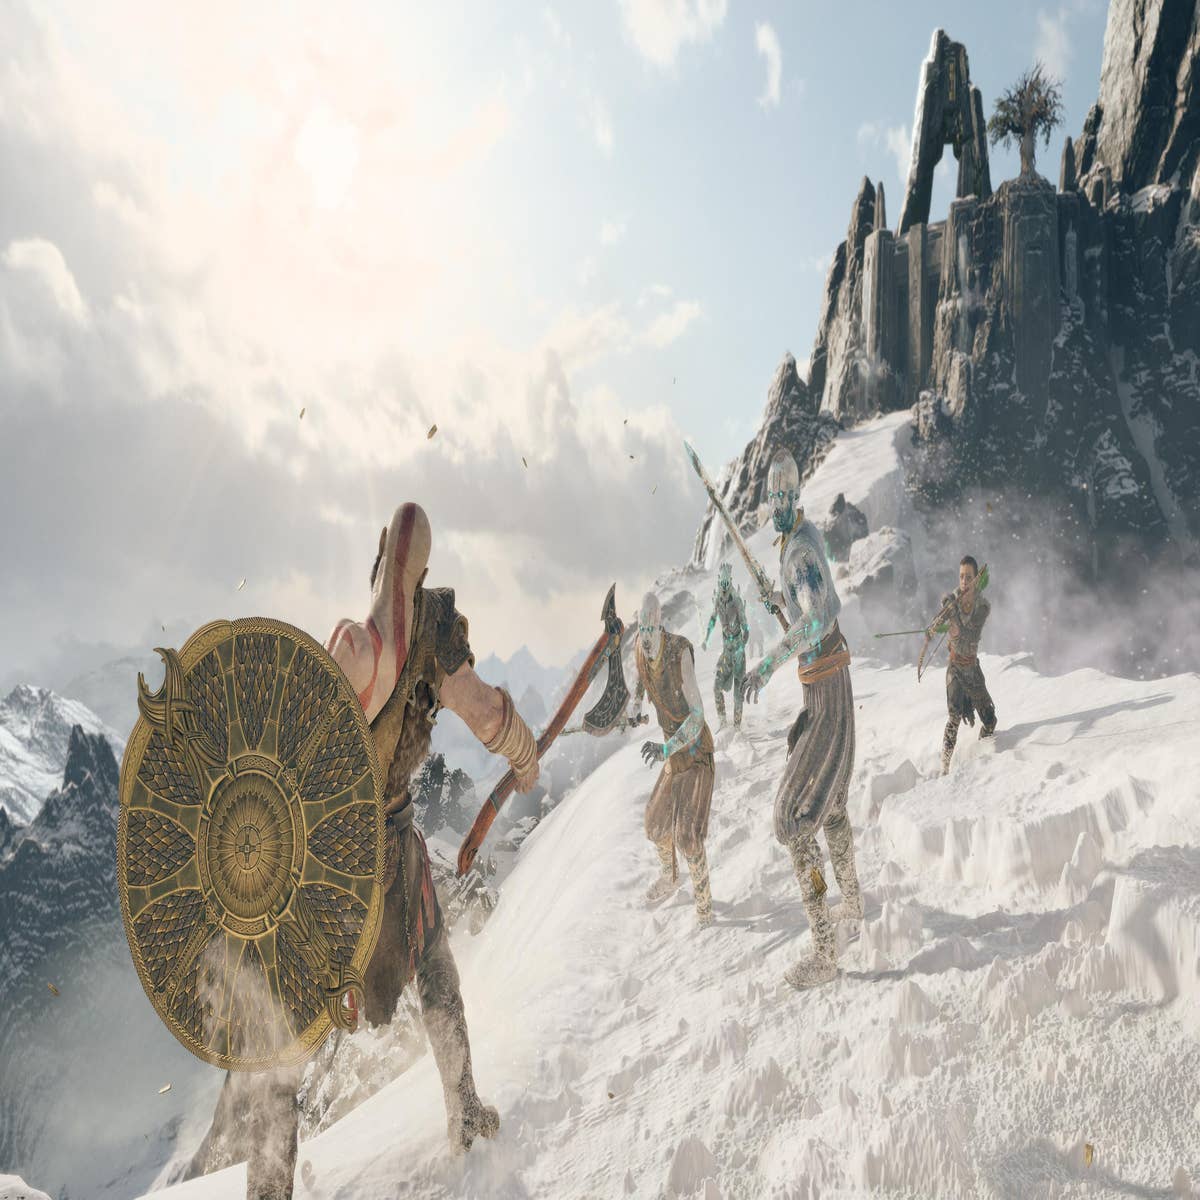 Is The God Of War PC Port Great Or A Poor Mess? –